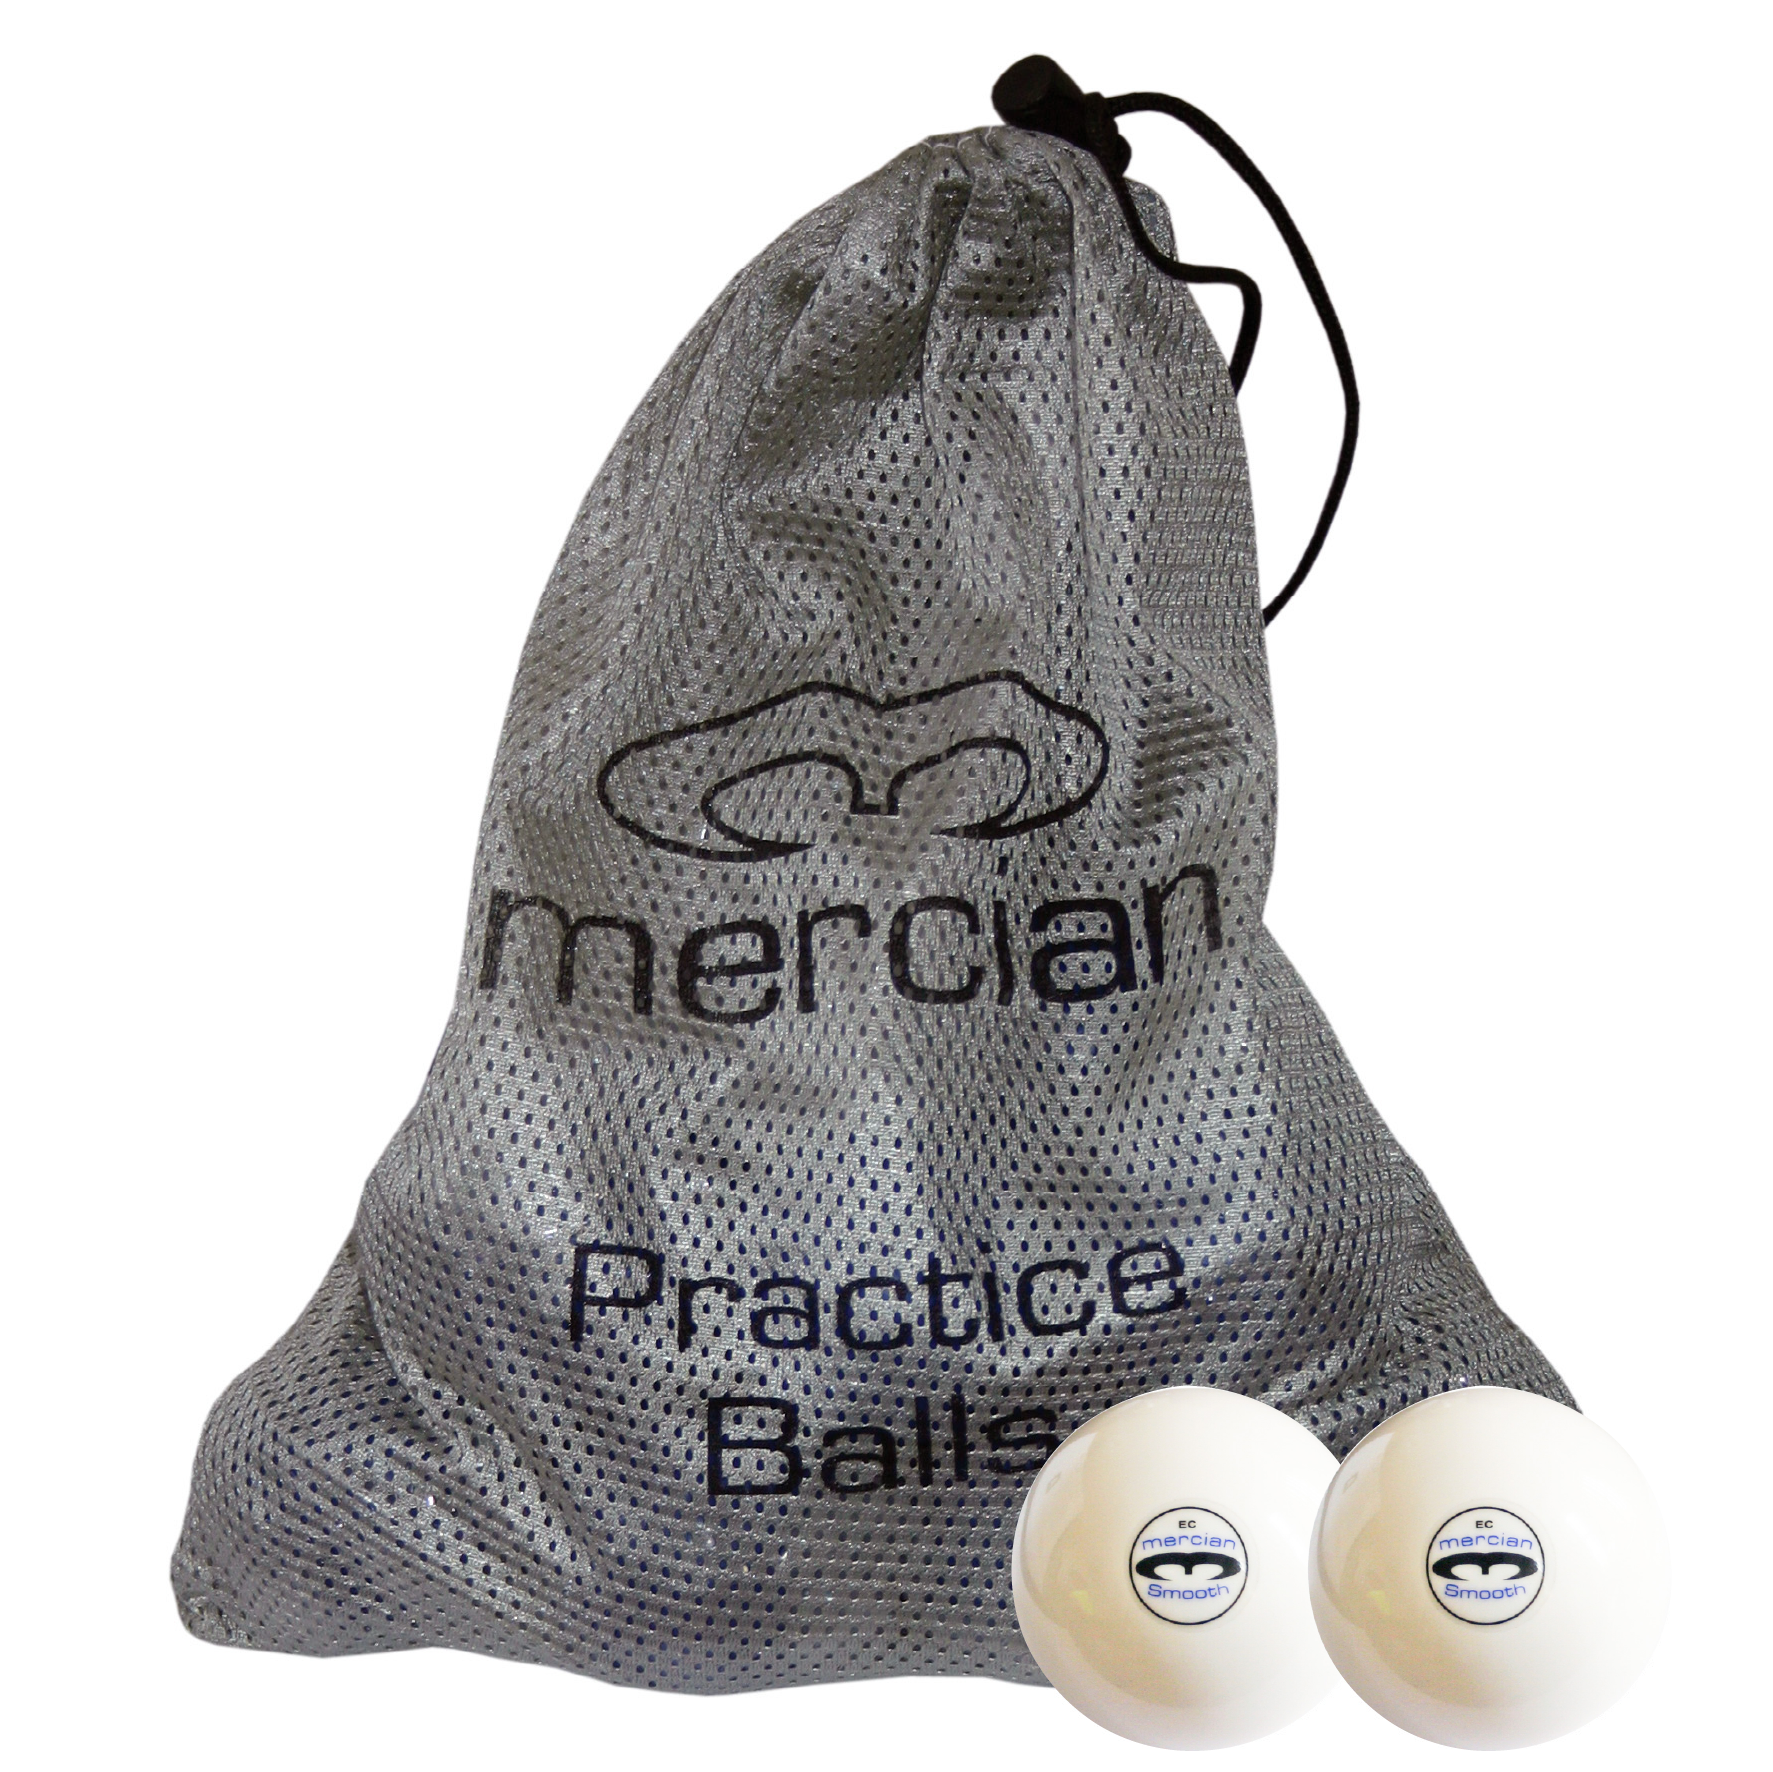 Mercian Training Ball Smooth (12 in a Bag)